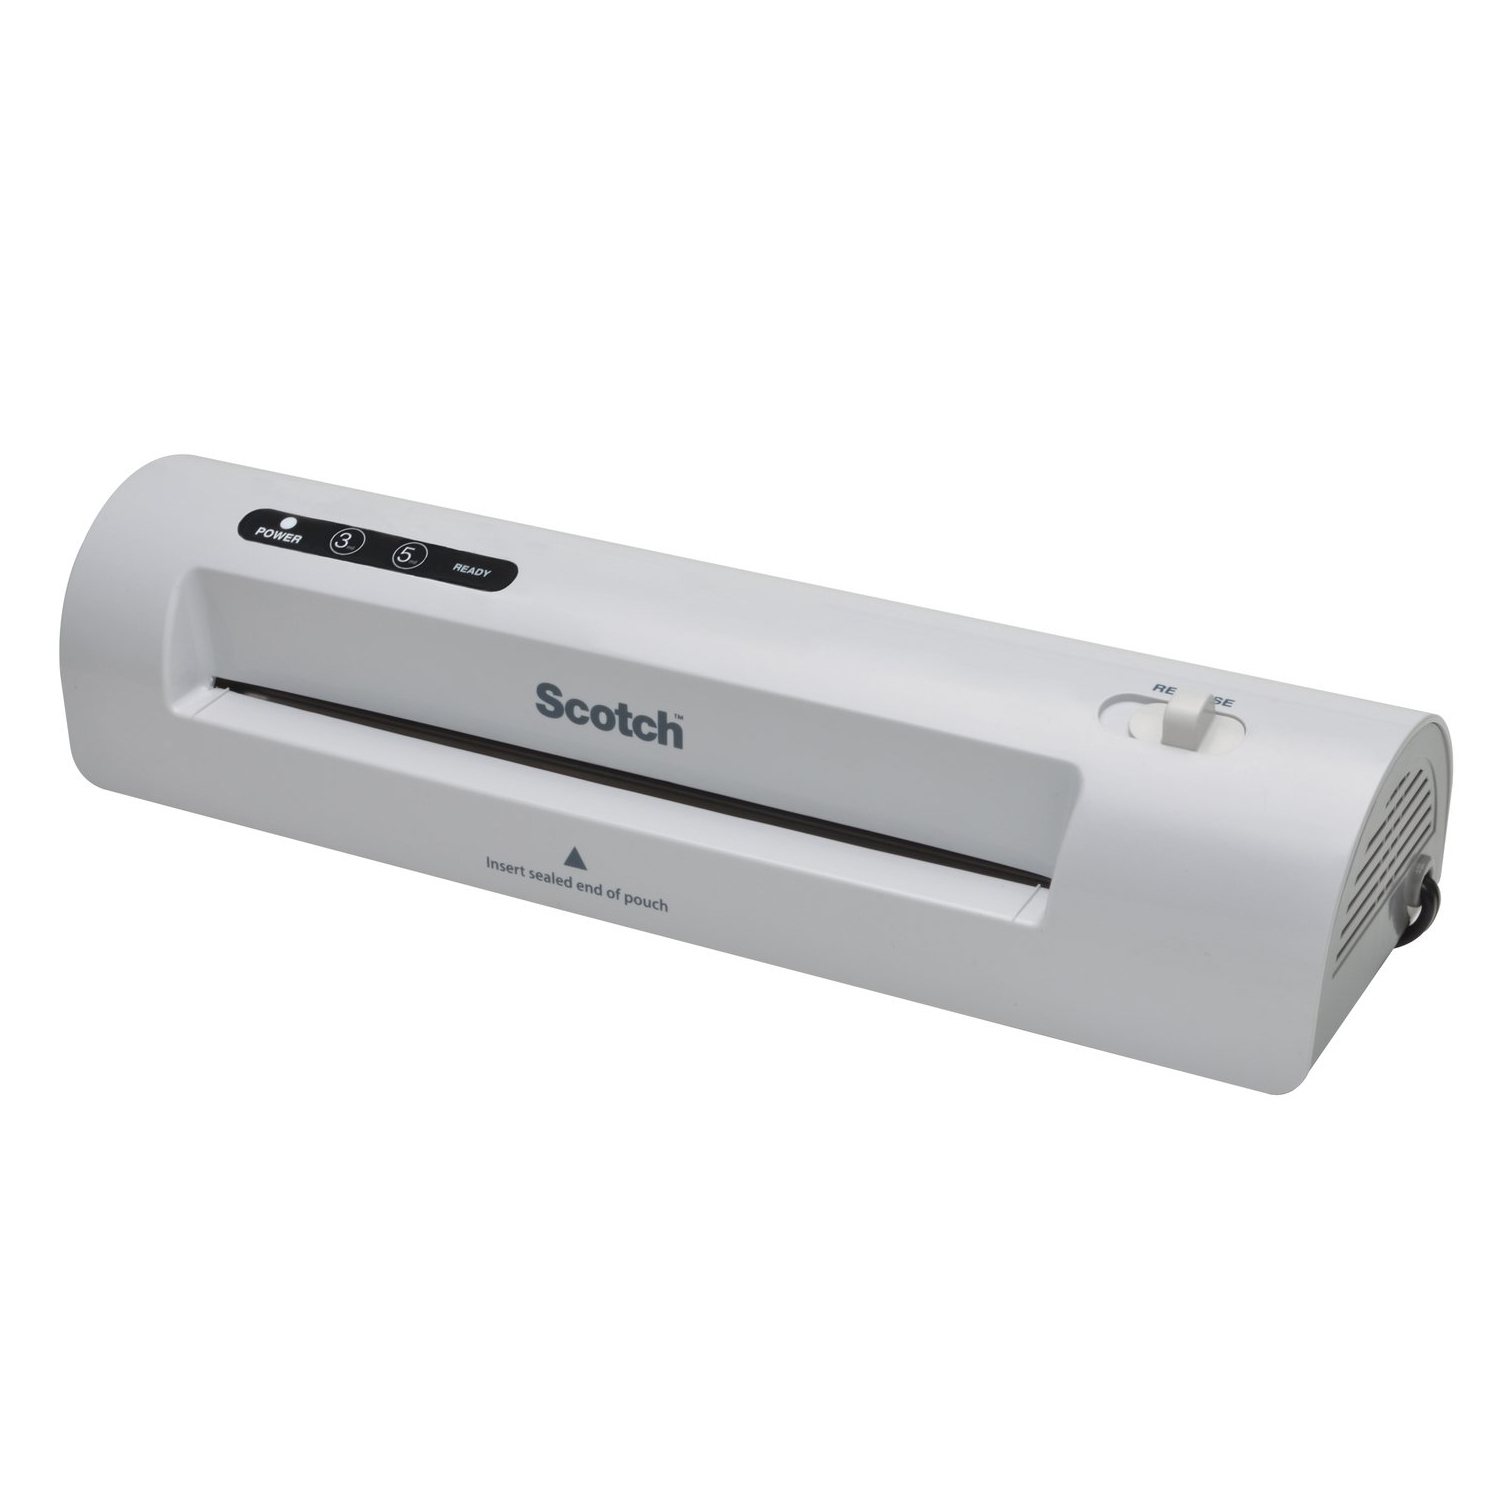 Our favorite laminator for all of our toddler projects